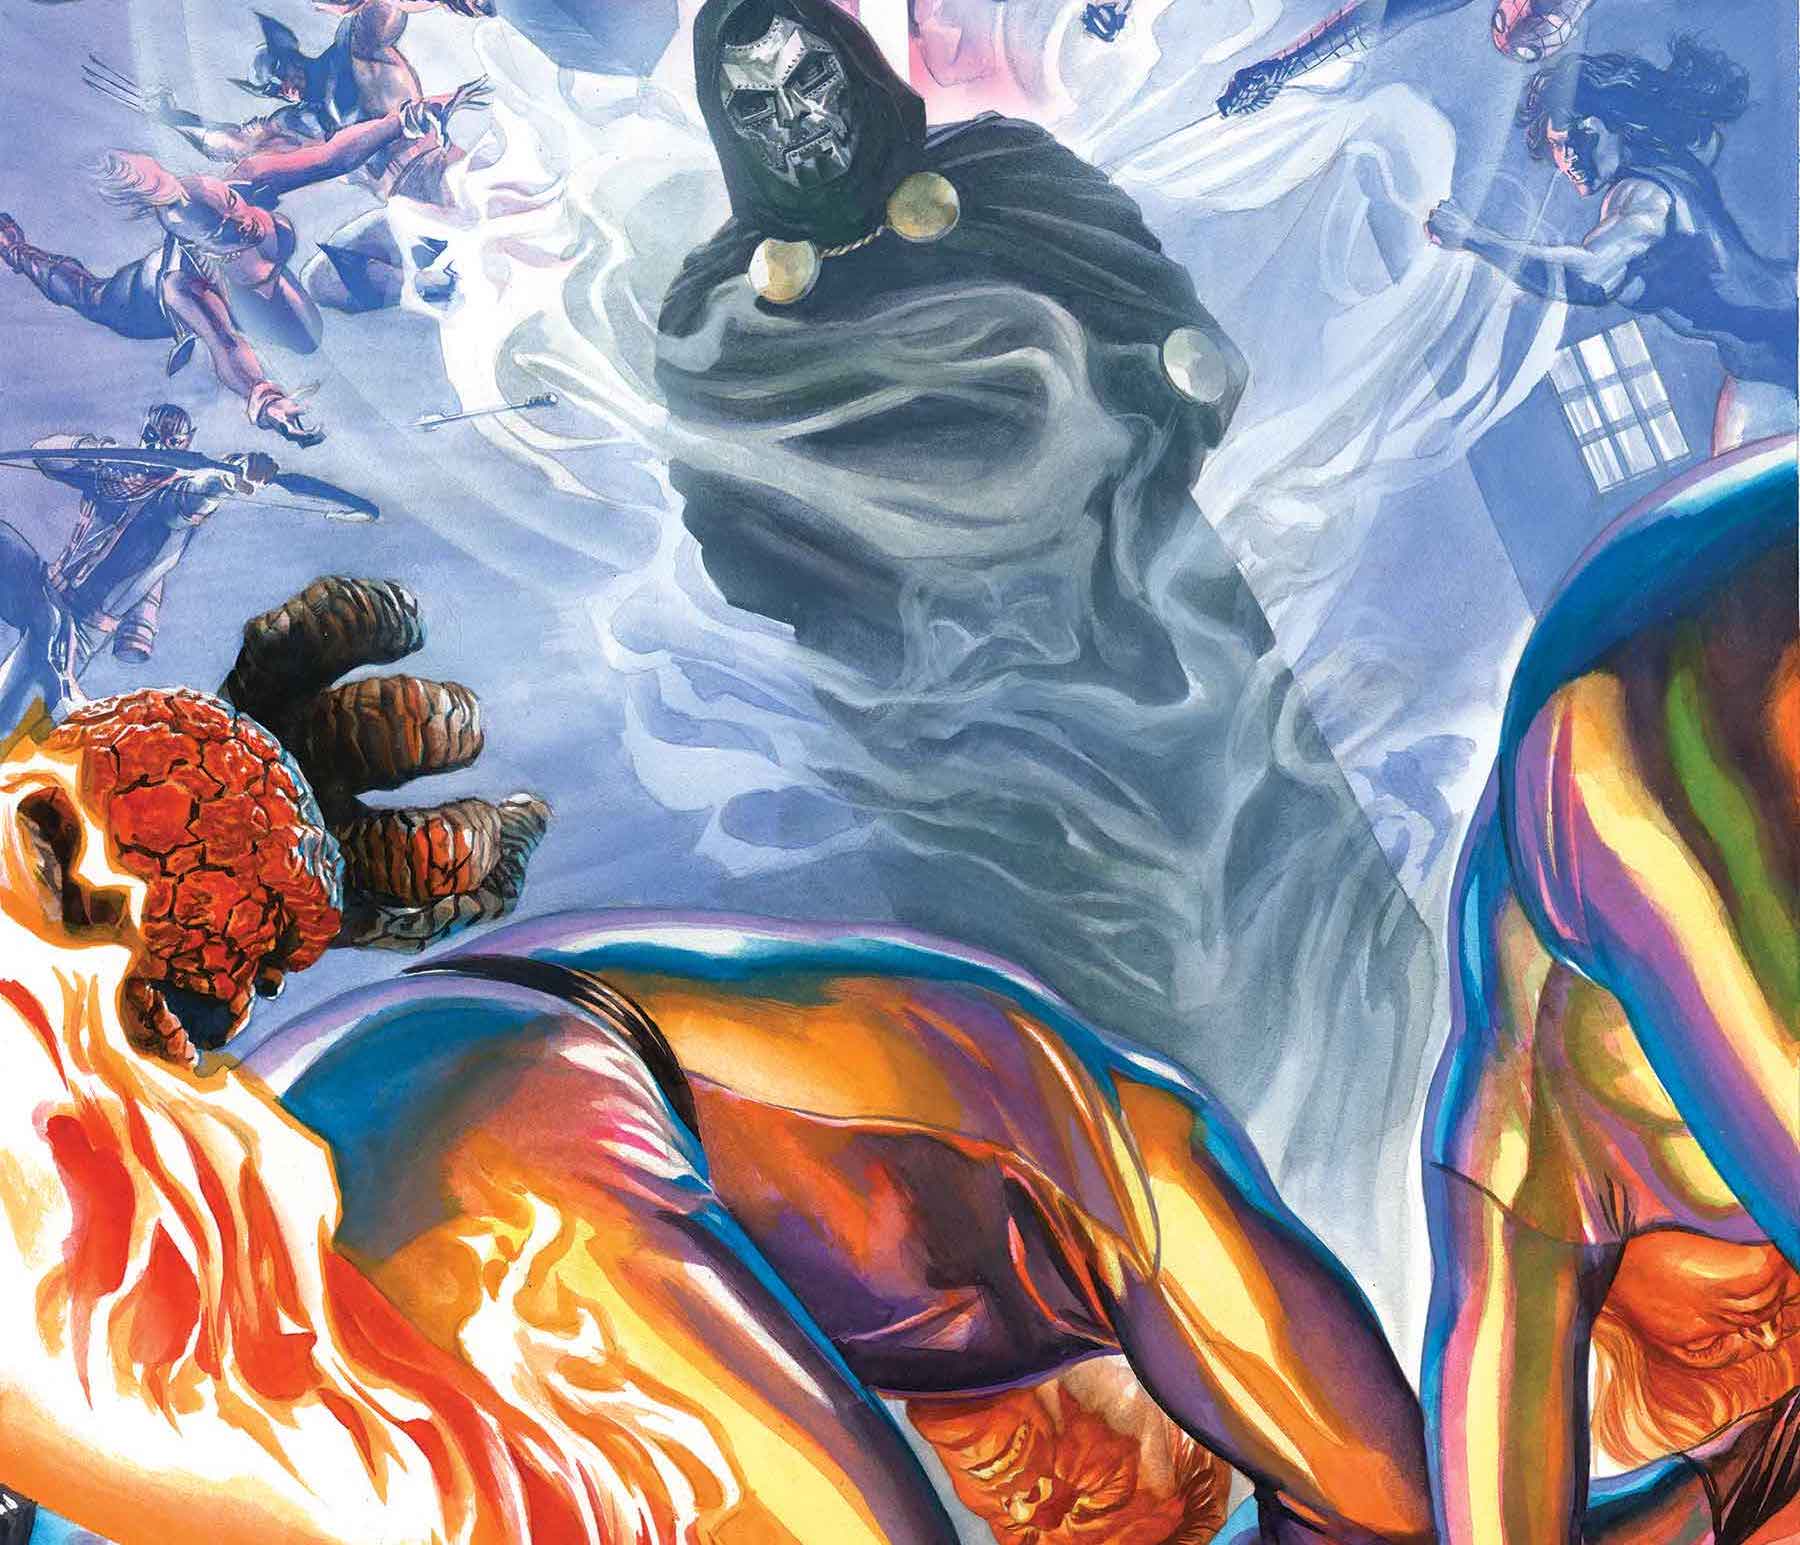 Doctor Doom sets out to fix the Fantastic Four's tragic mistake in 'Fantastic Four' #700